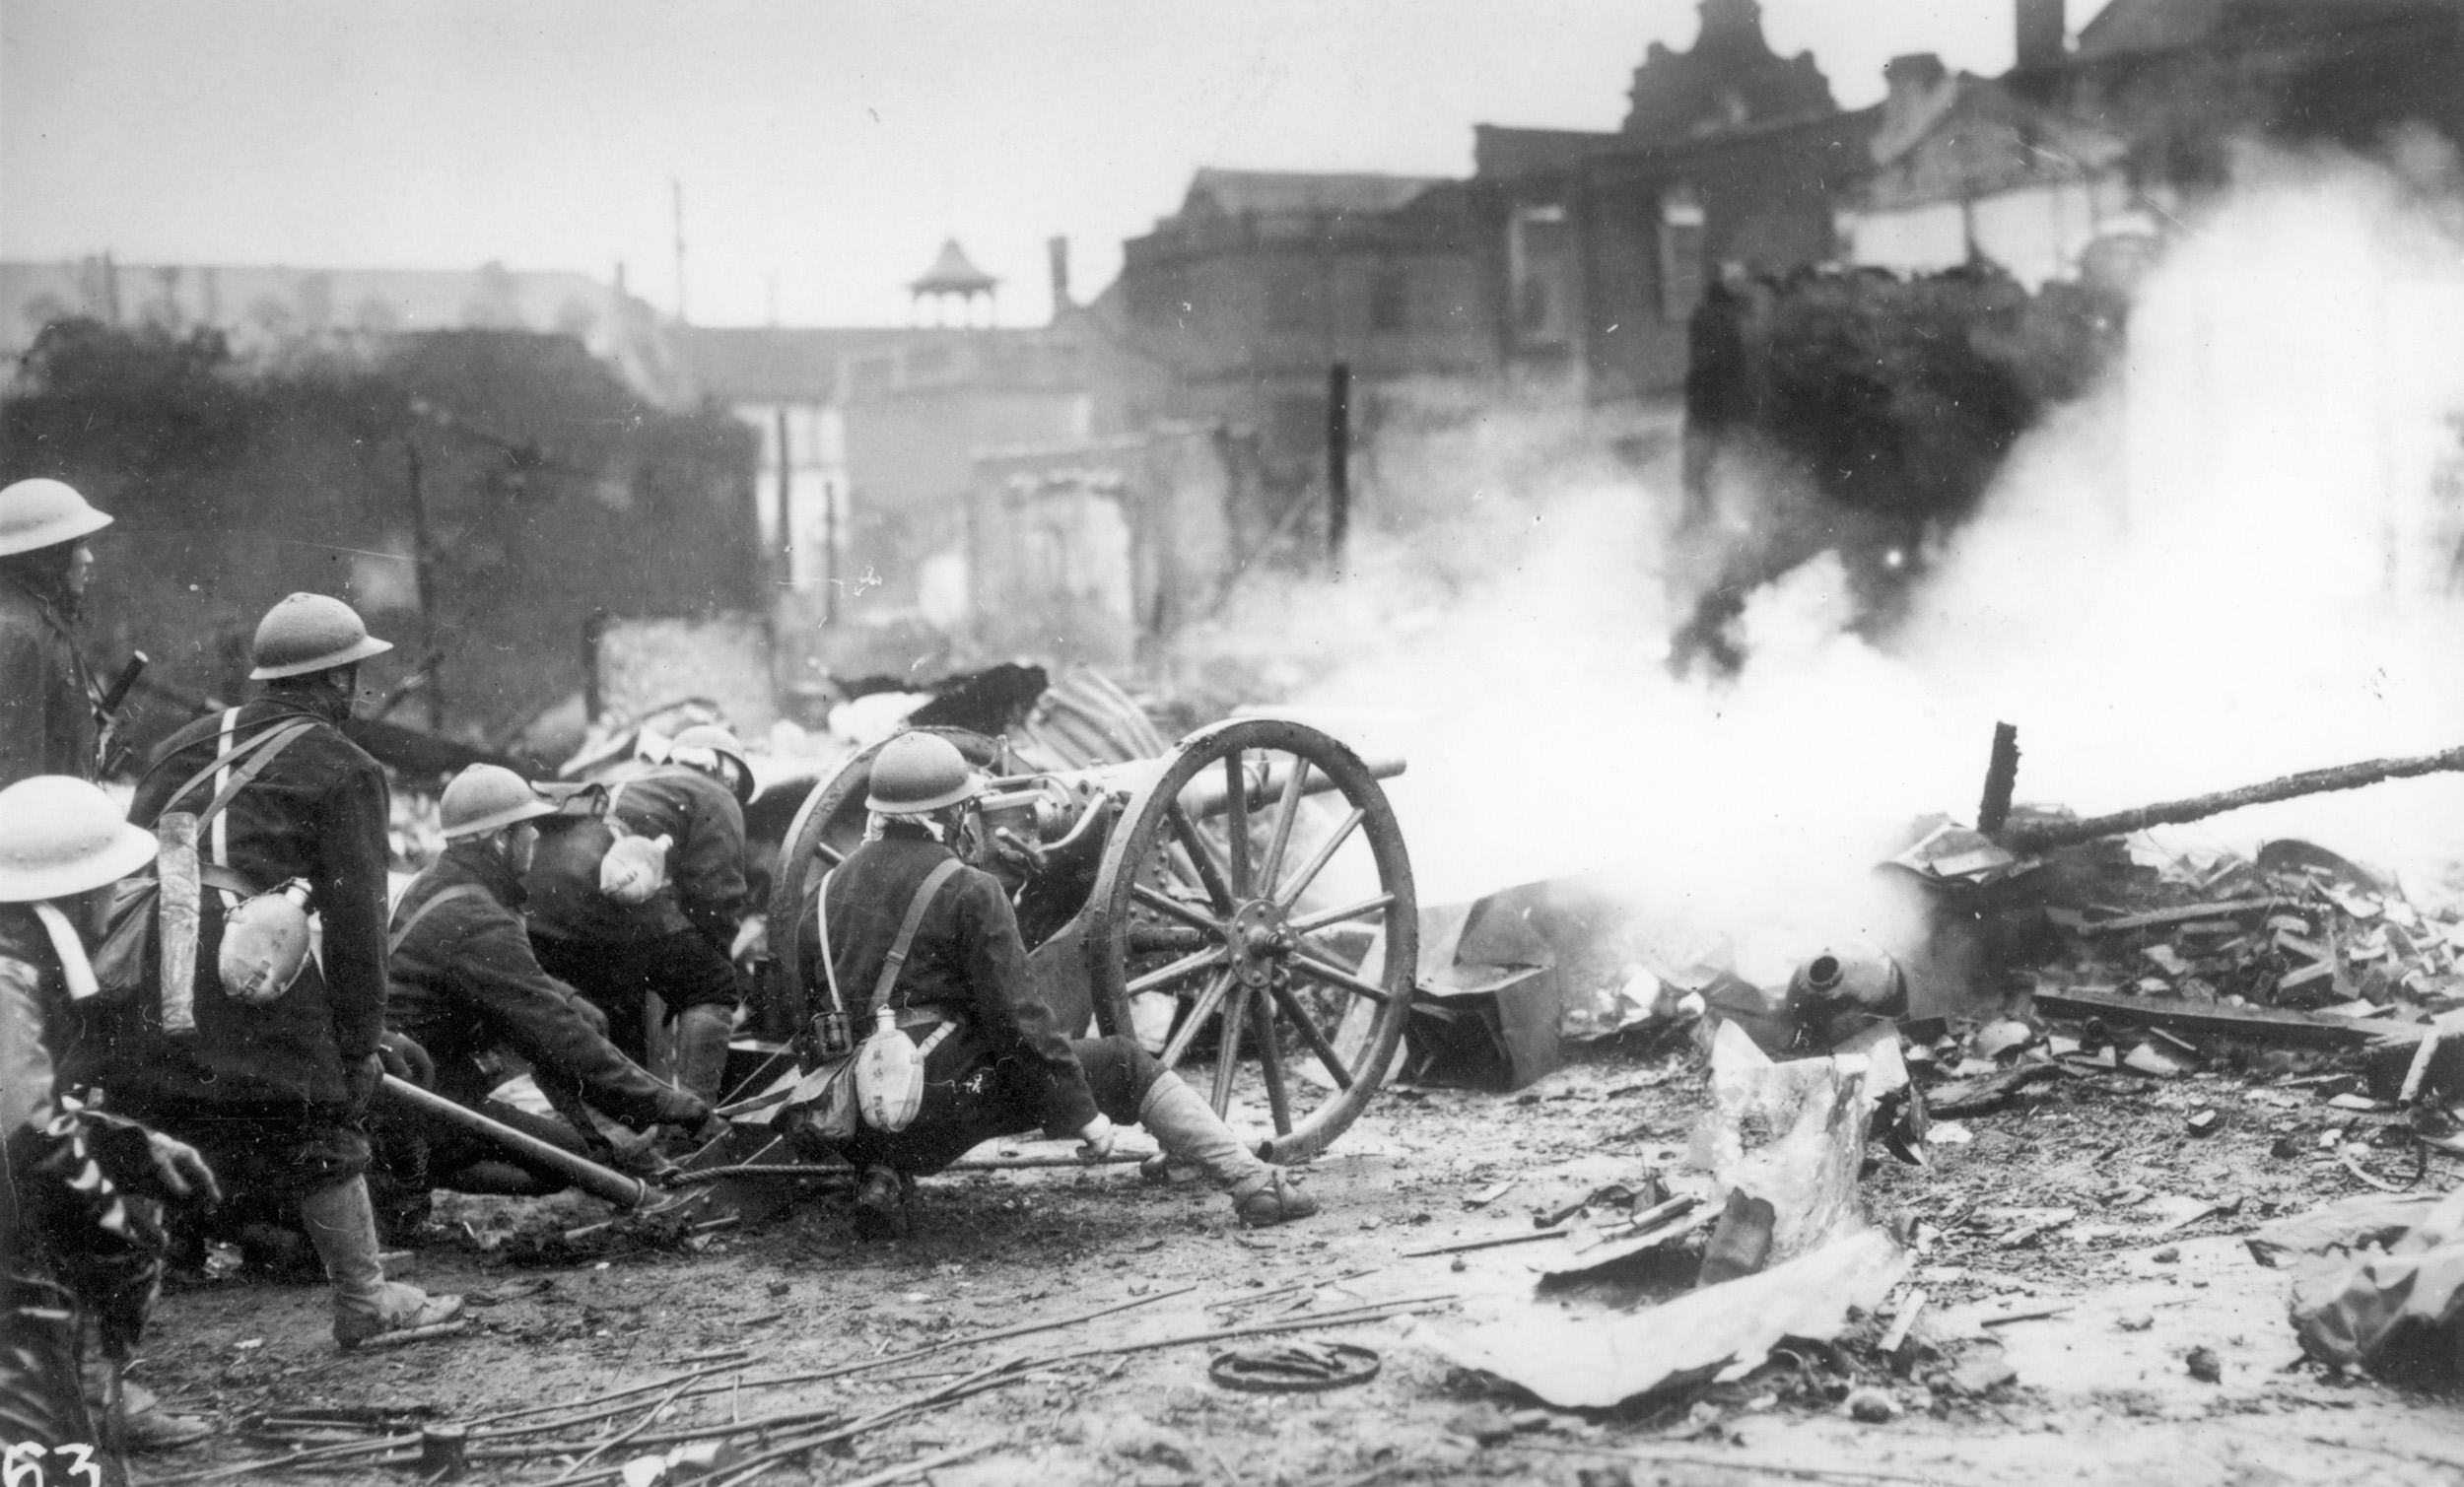 In a rubble-strewn Shanghai street, Chinese soldiers service a small, obsolescent artillery piece during the fighting of 1932.